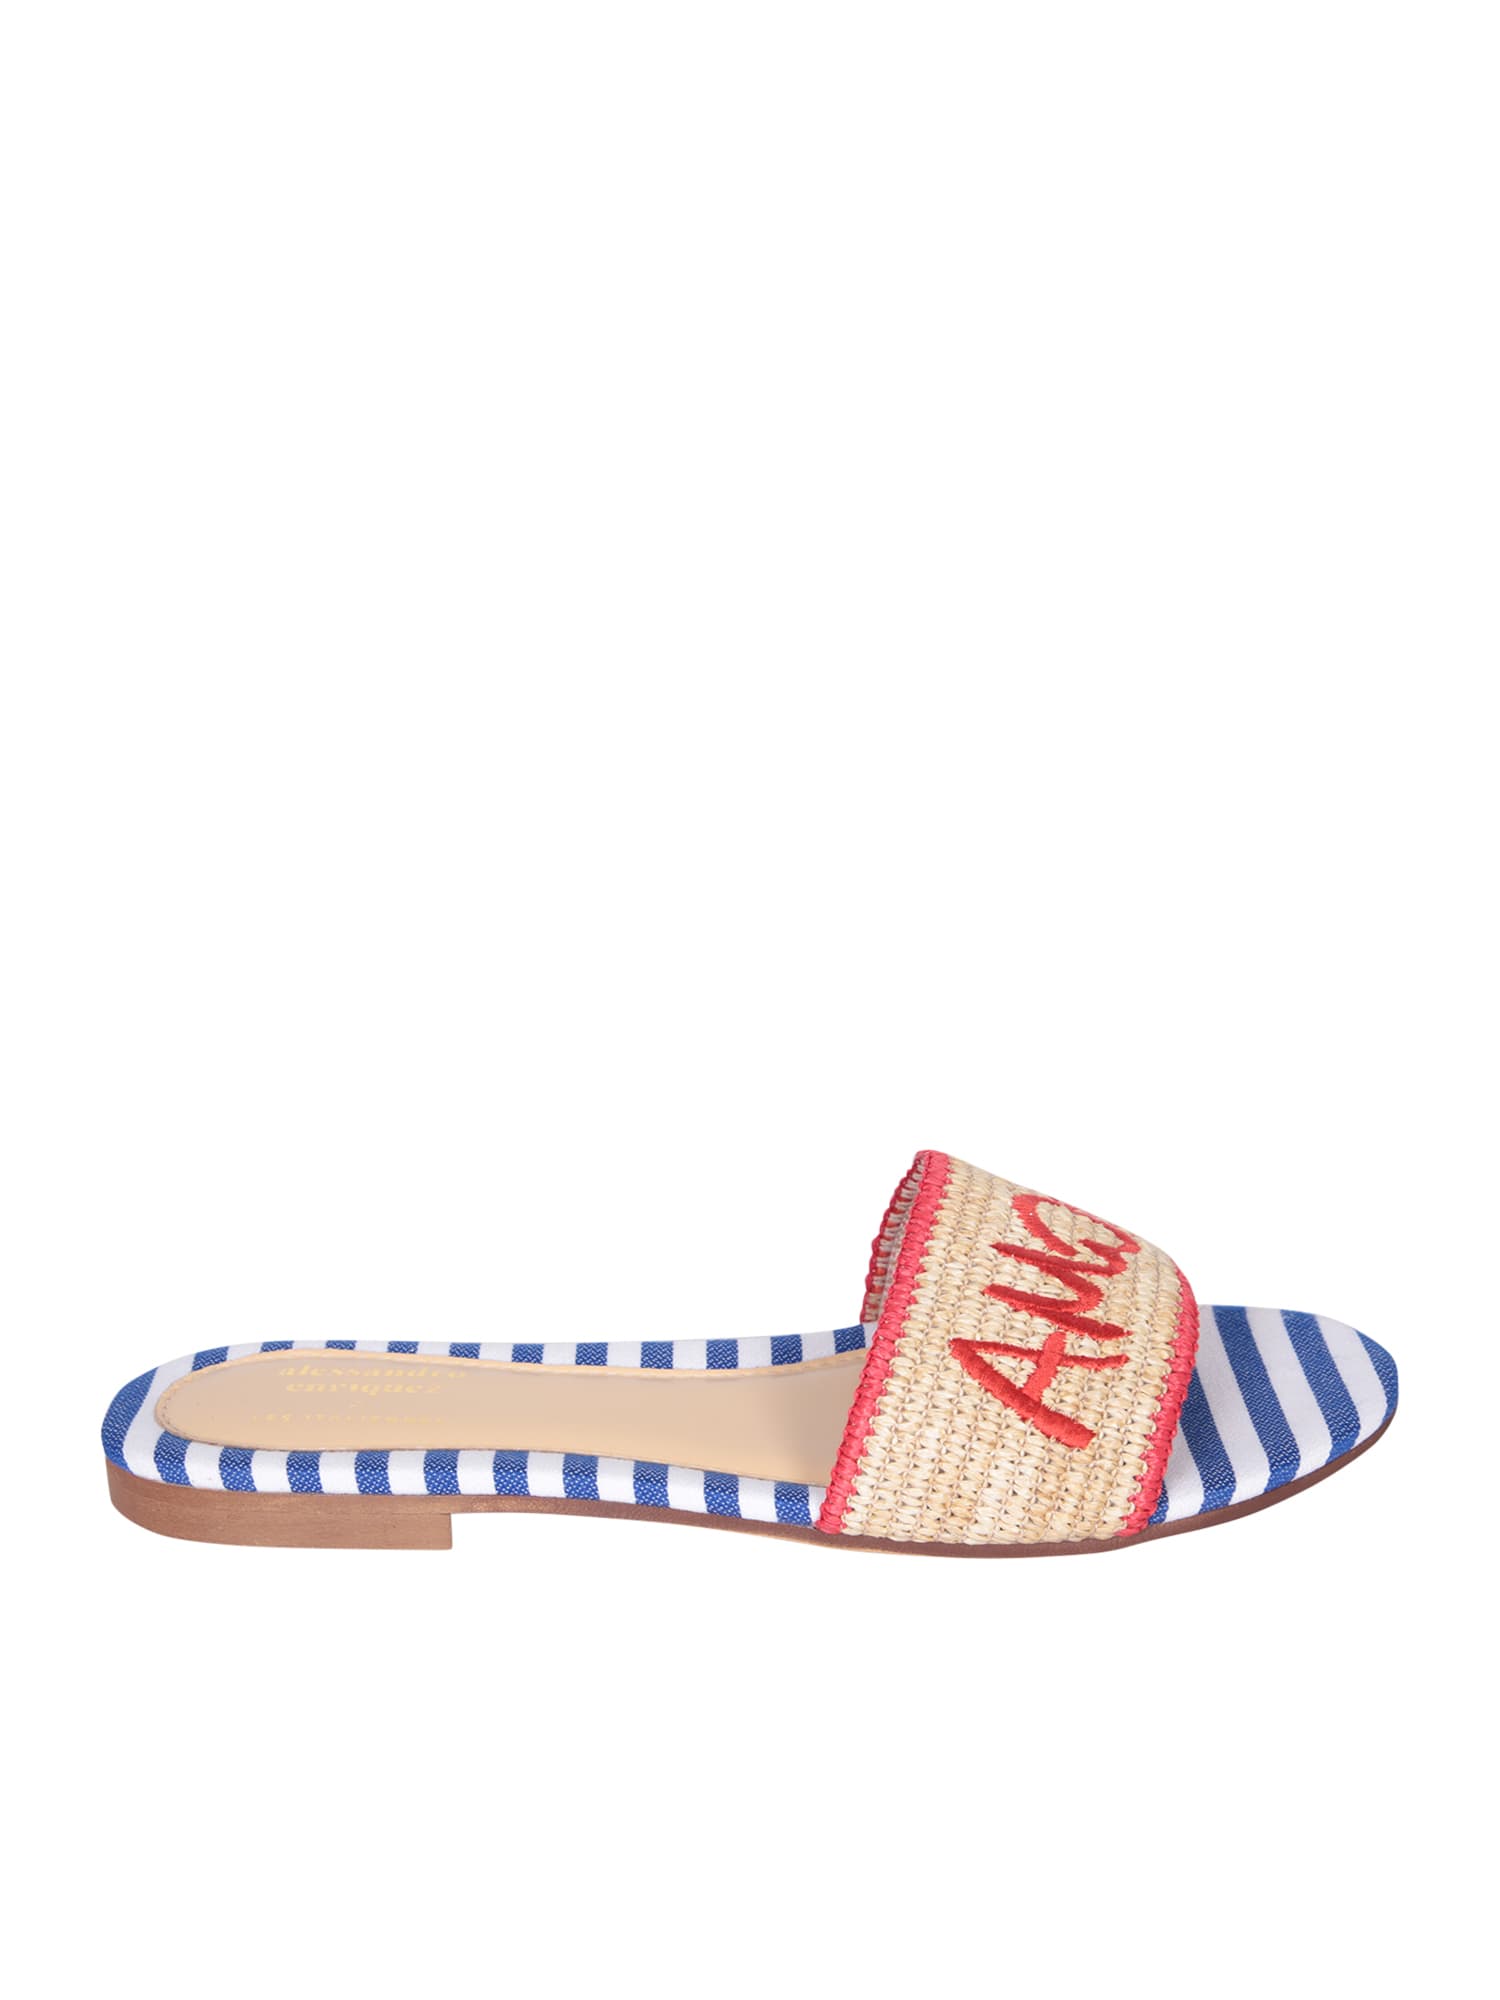 Amore Beige Red Sandals